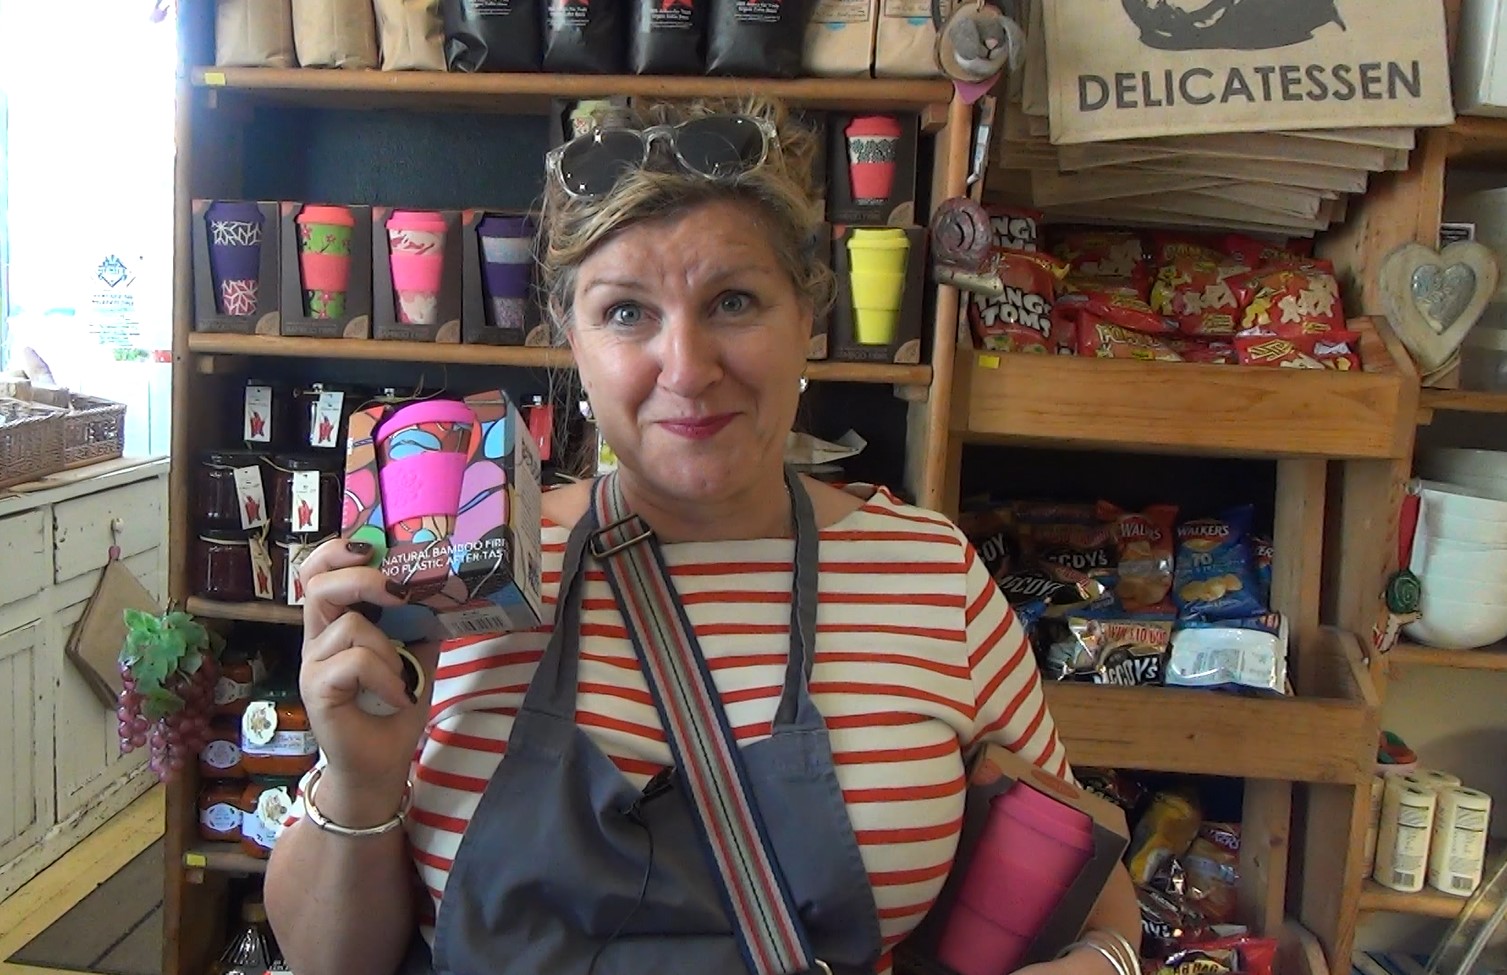 Fran Sykes, owner of Snails Deli, shows off their new range of bamboo cups